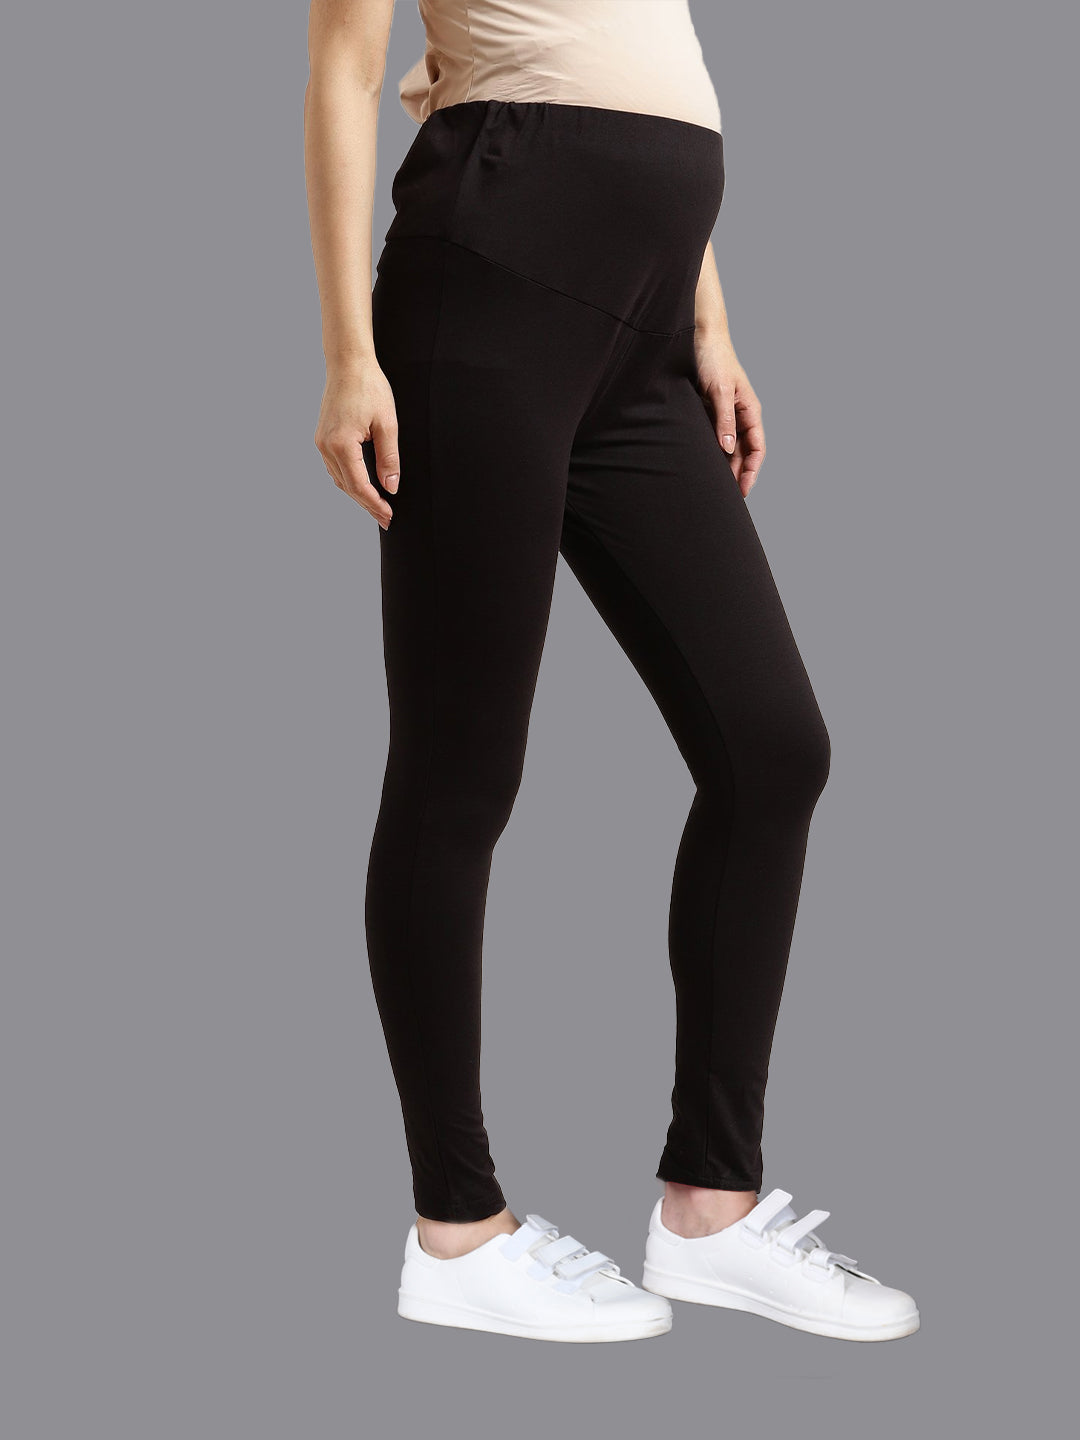 LUX Lyra Cotton Stretchable Full length Churidar Lycra Leggings for women -  Black - Frozentags - Ladies Dress Materials